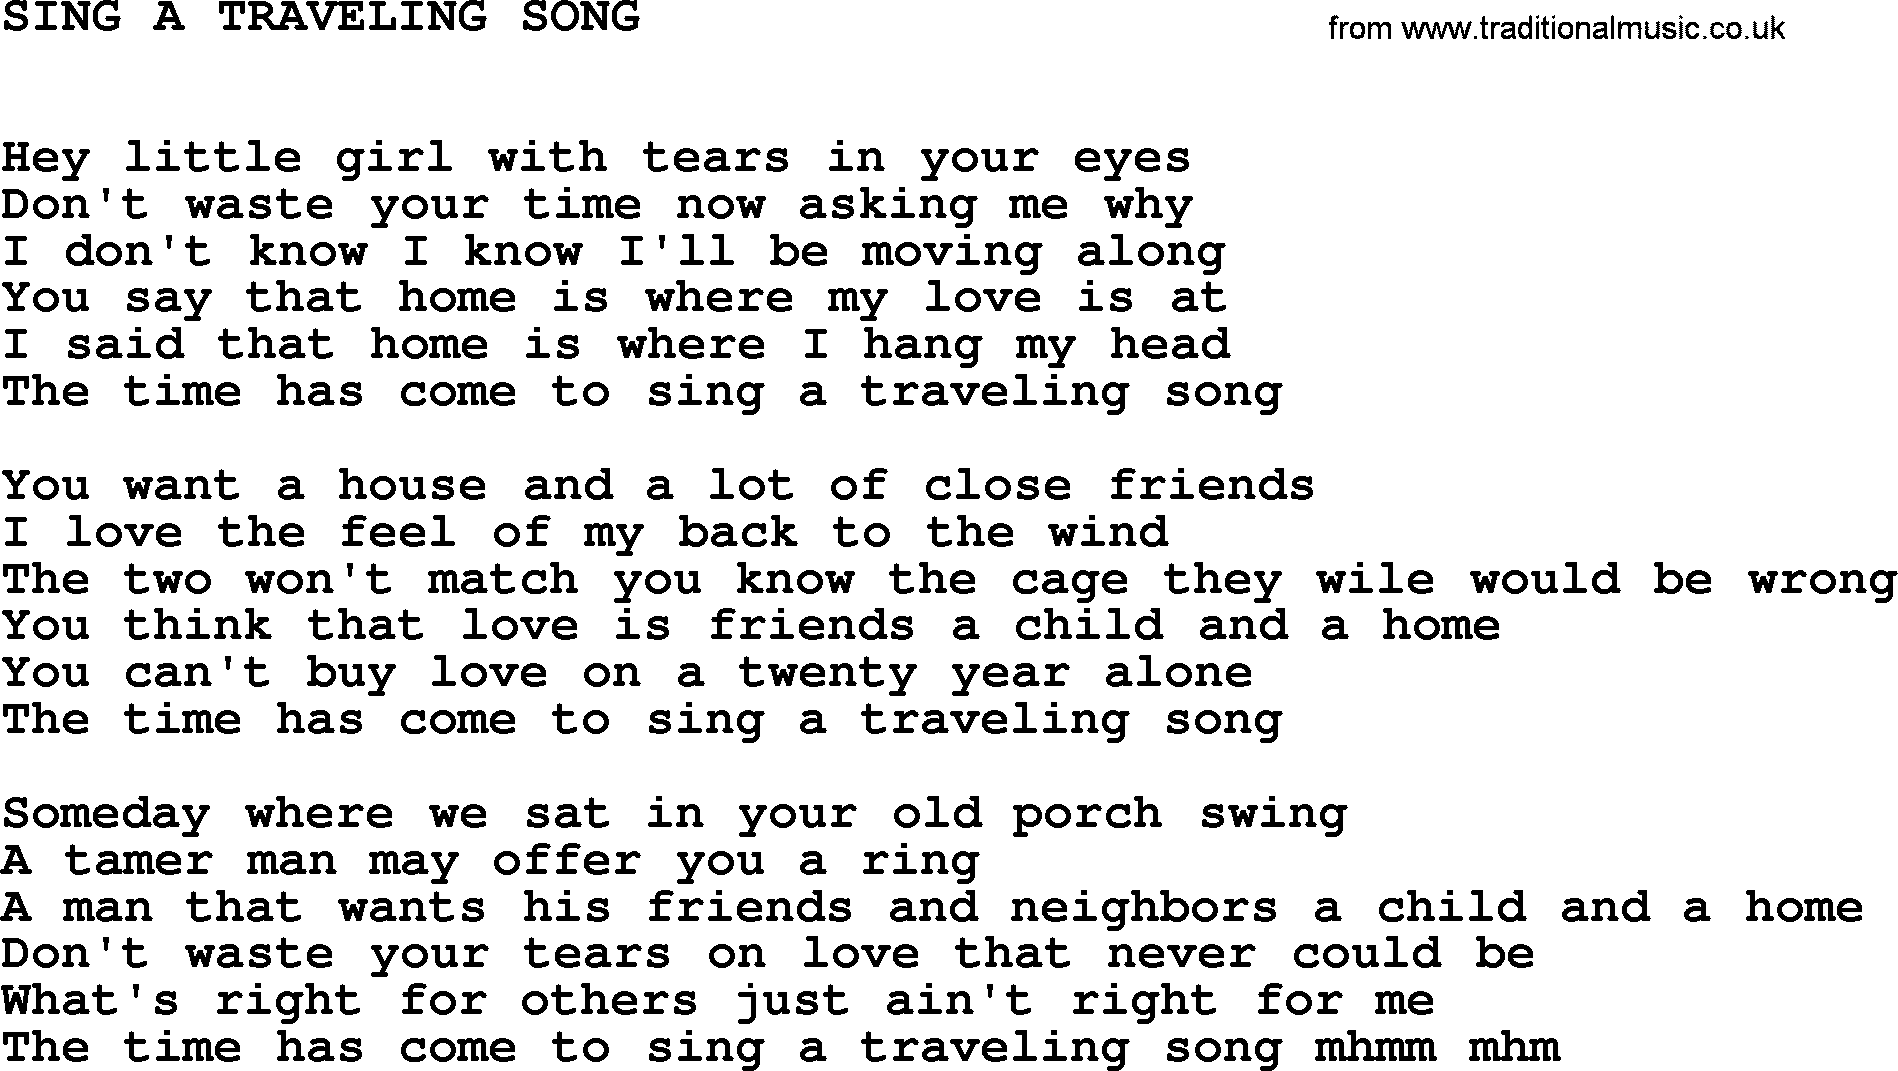 Johnny Cash song Sing A Traveling Song.txt lyrics